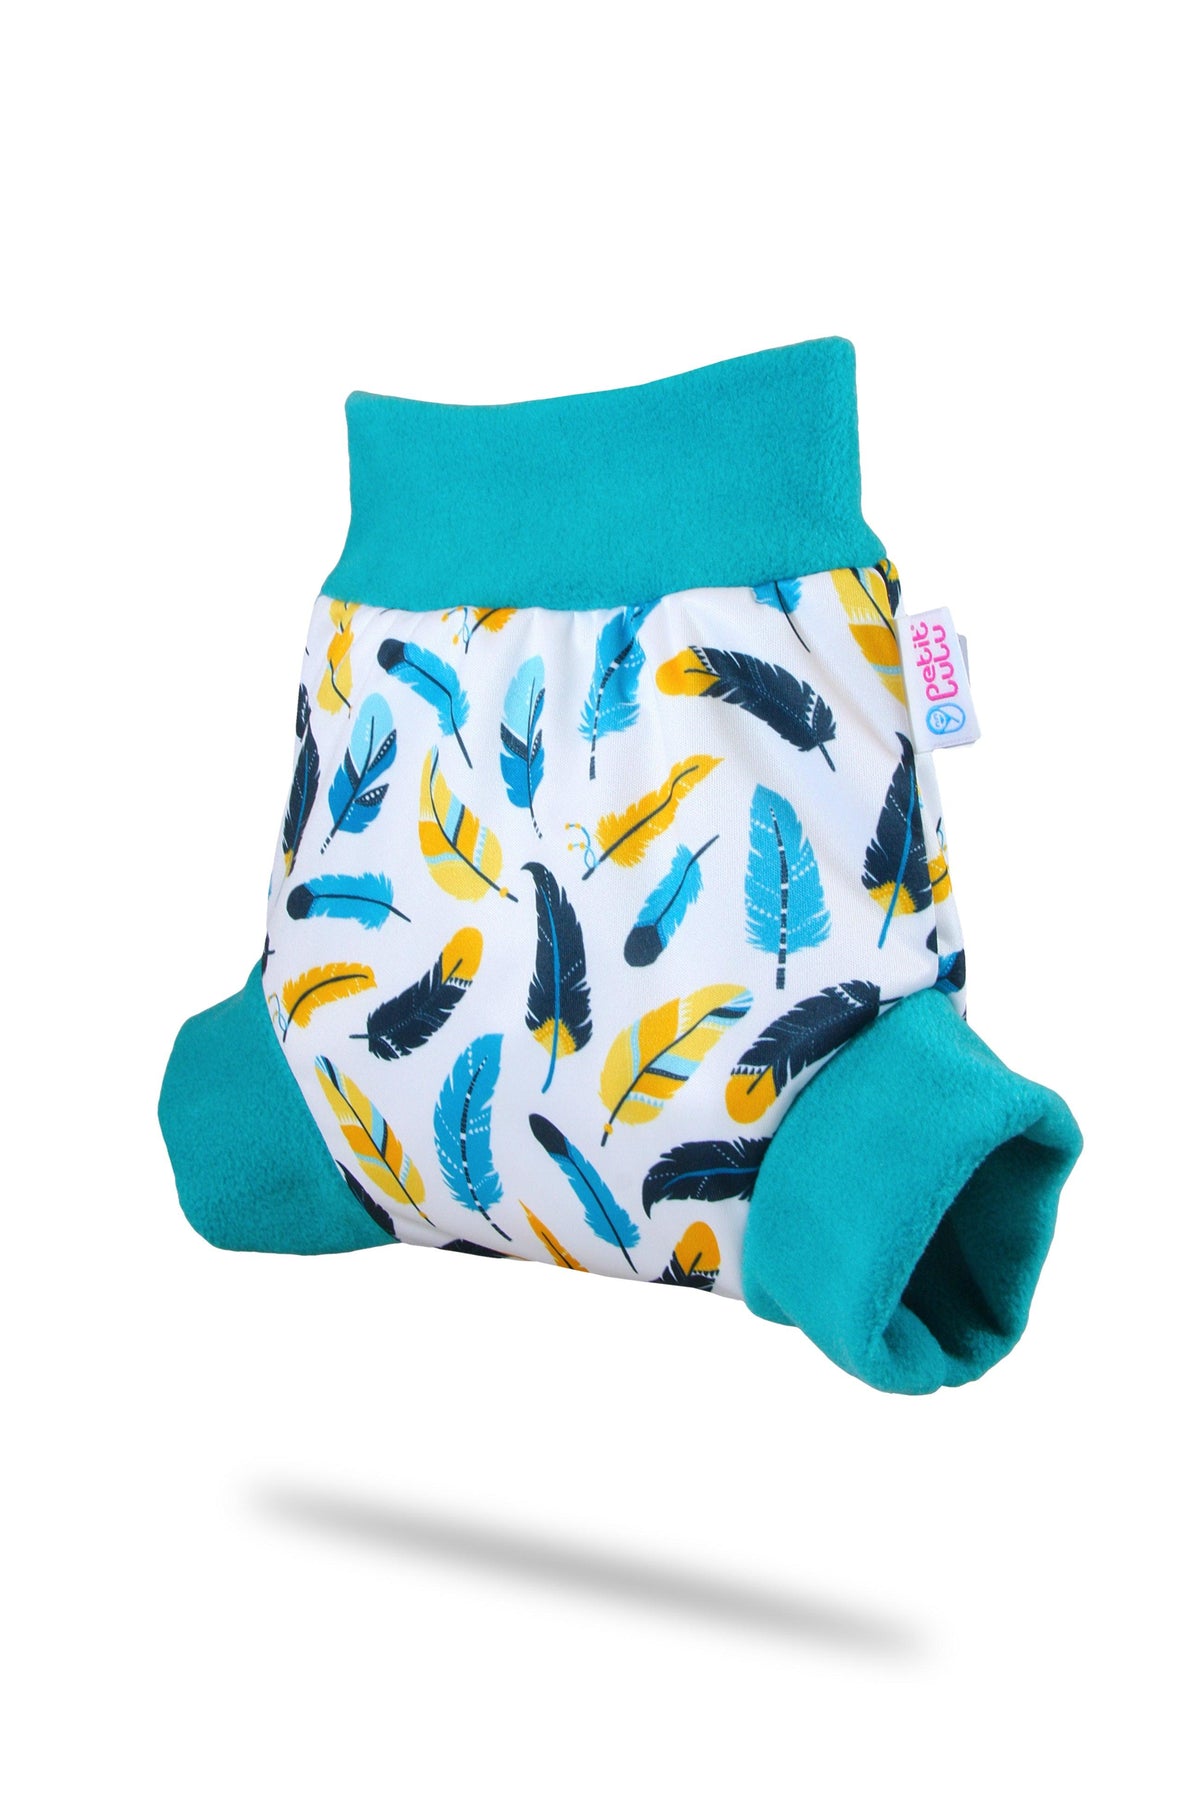 Petit Lulu | Couvre-couche Pull-Up | Turquoise Feathers (LIQUIDATION VENTE FINALE) - Petit Lulu